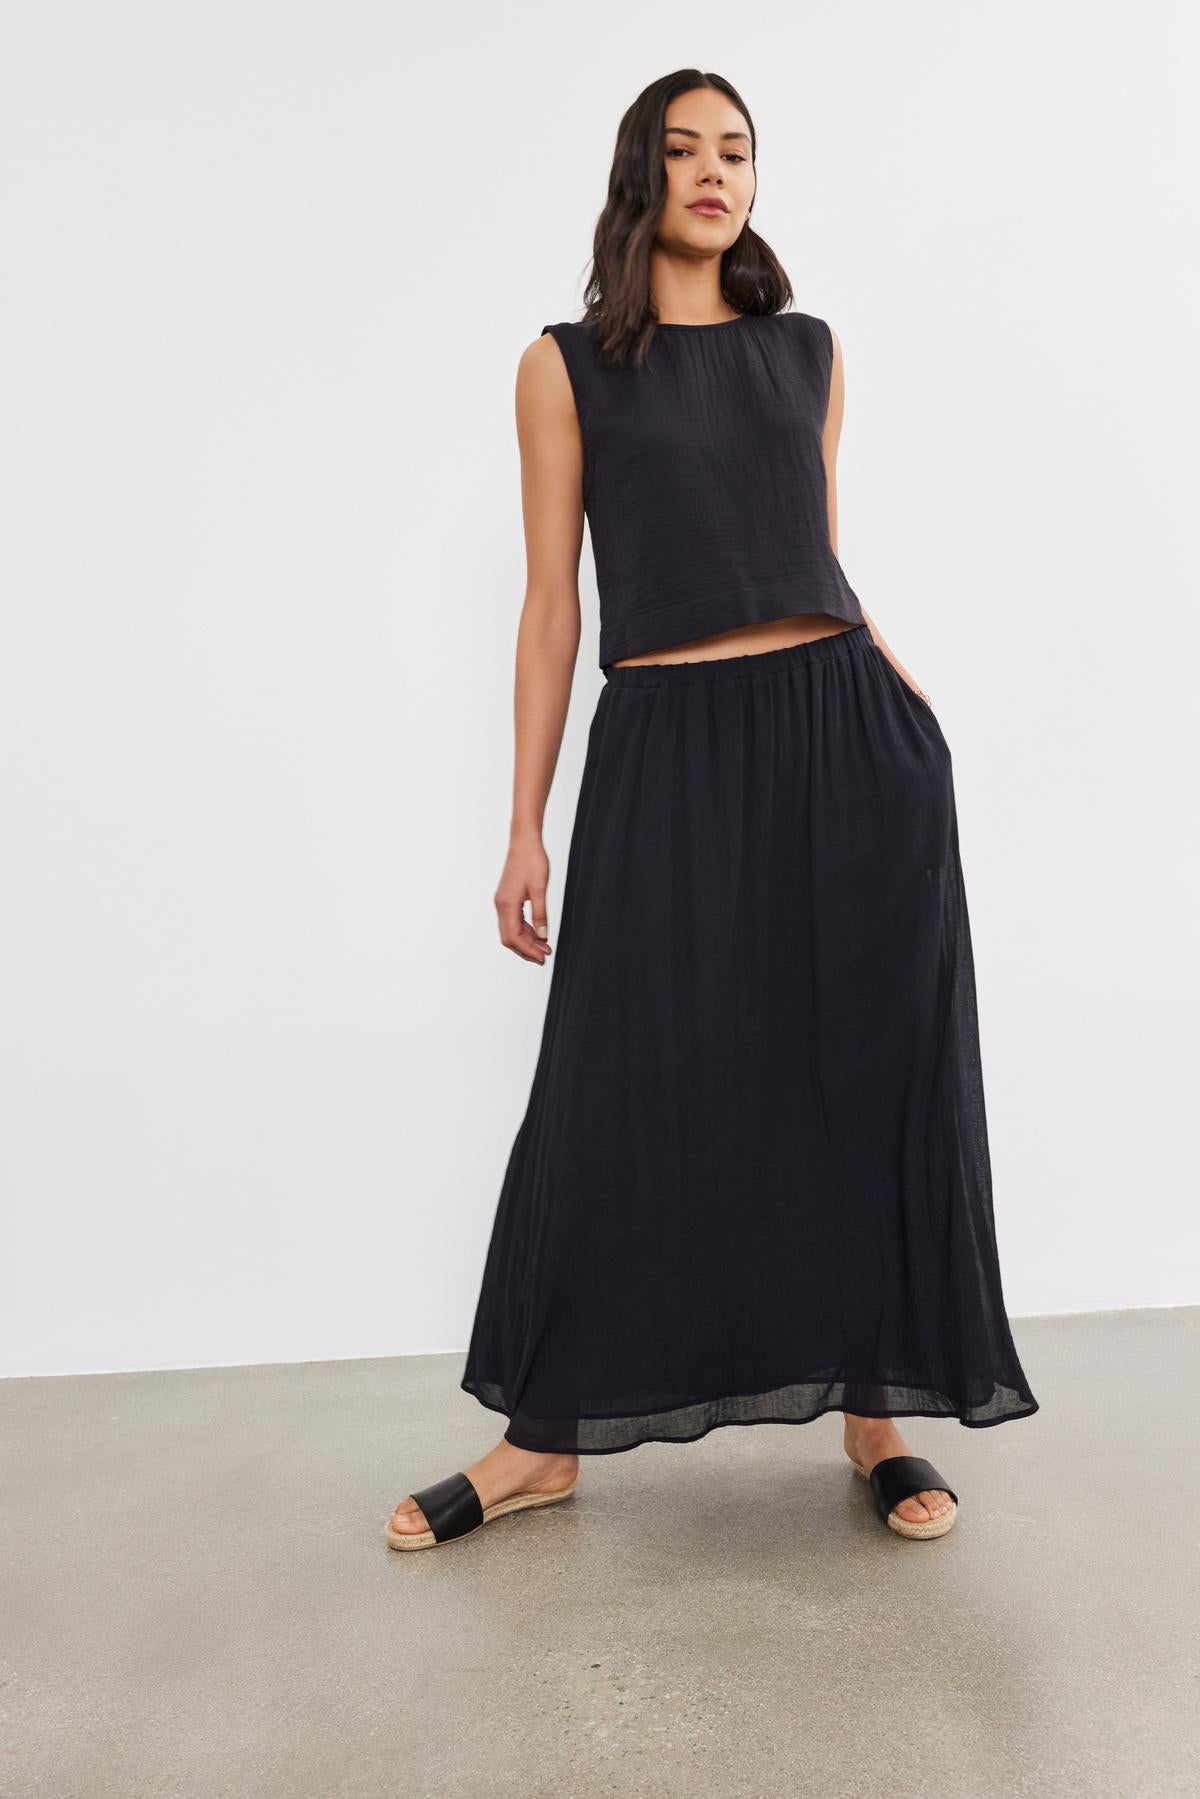 A woman wearing a black Aubren Cotton Gauze tank top and a long matching skirt stands on a plain background, looking at the camera.-36910092091585